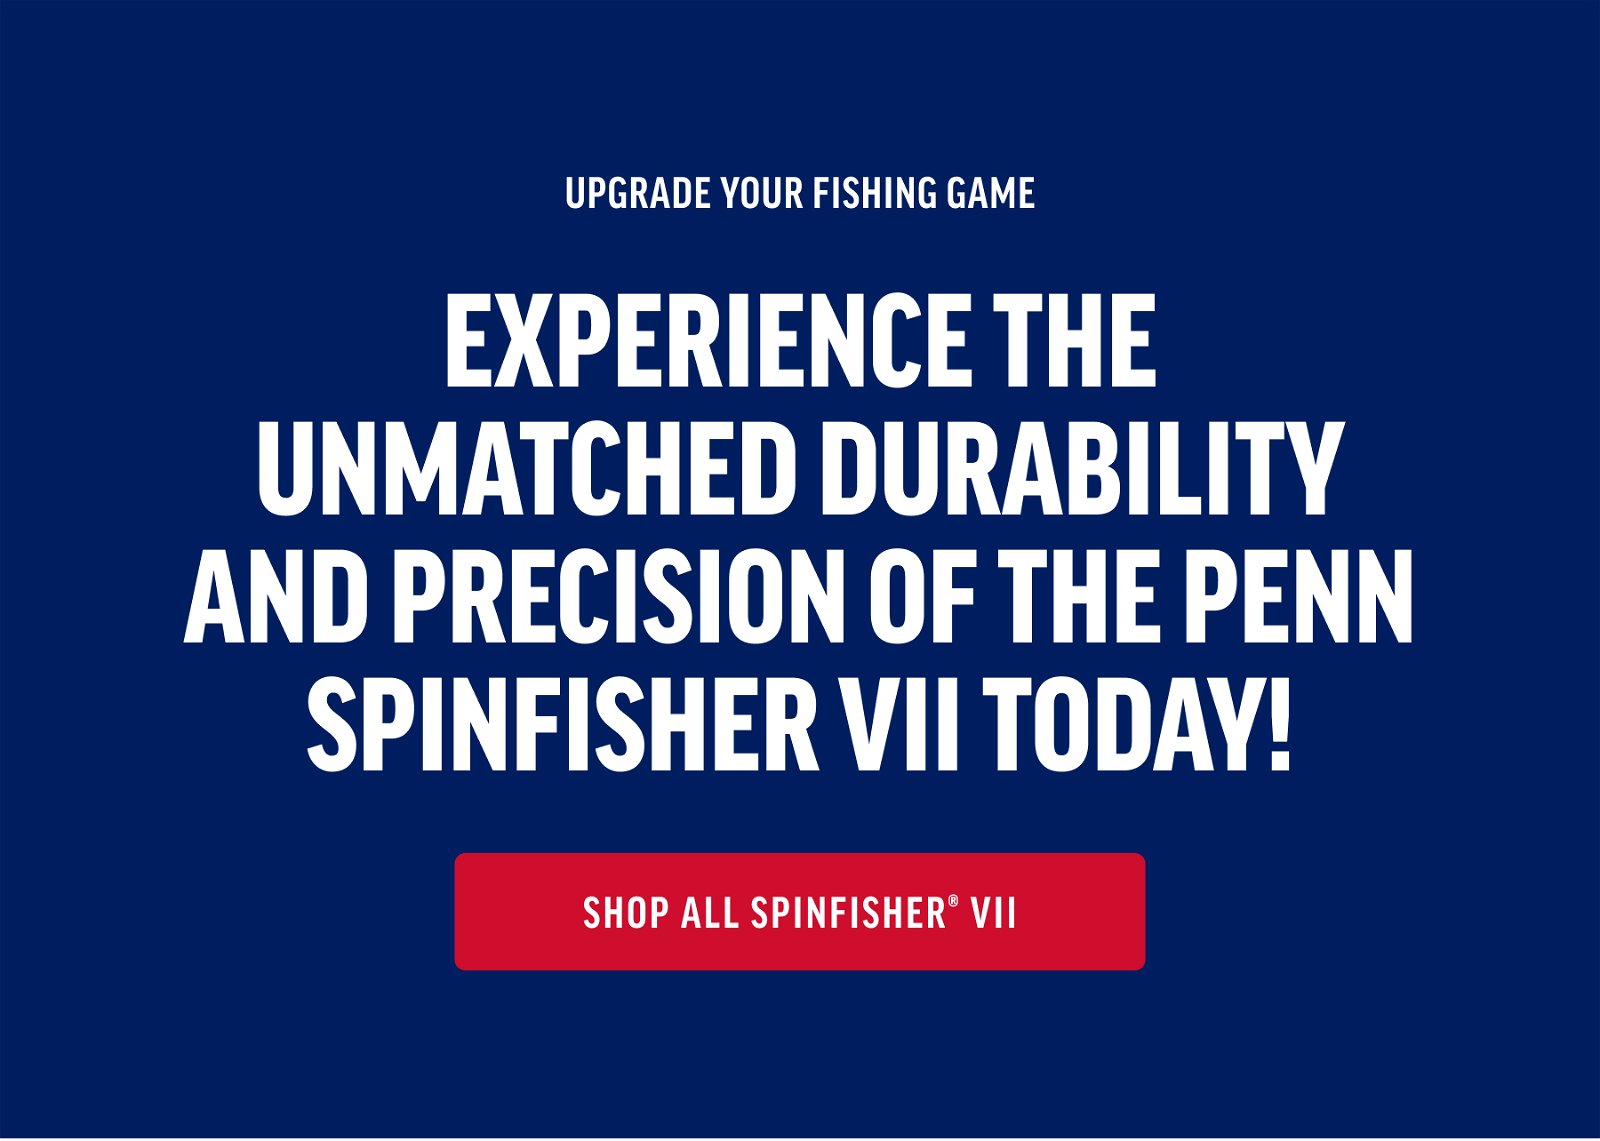 Shop All Spinfisher® VII